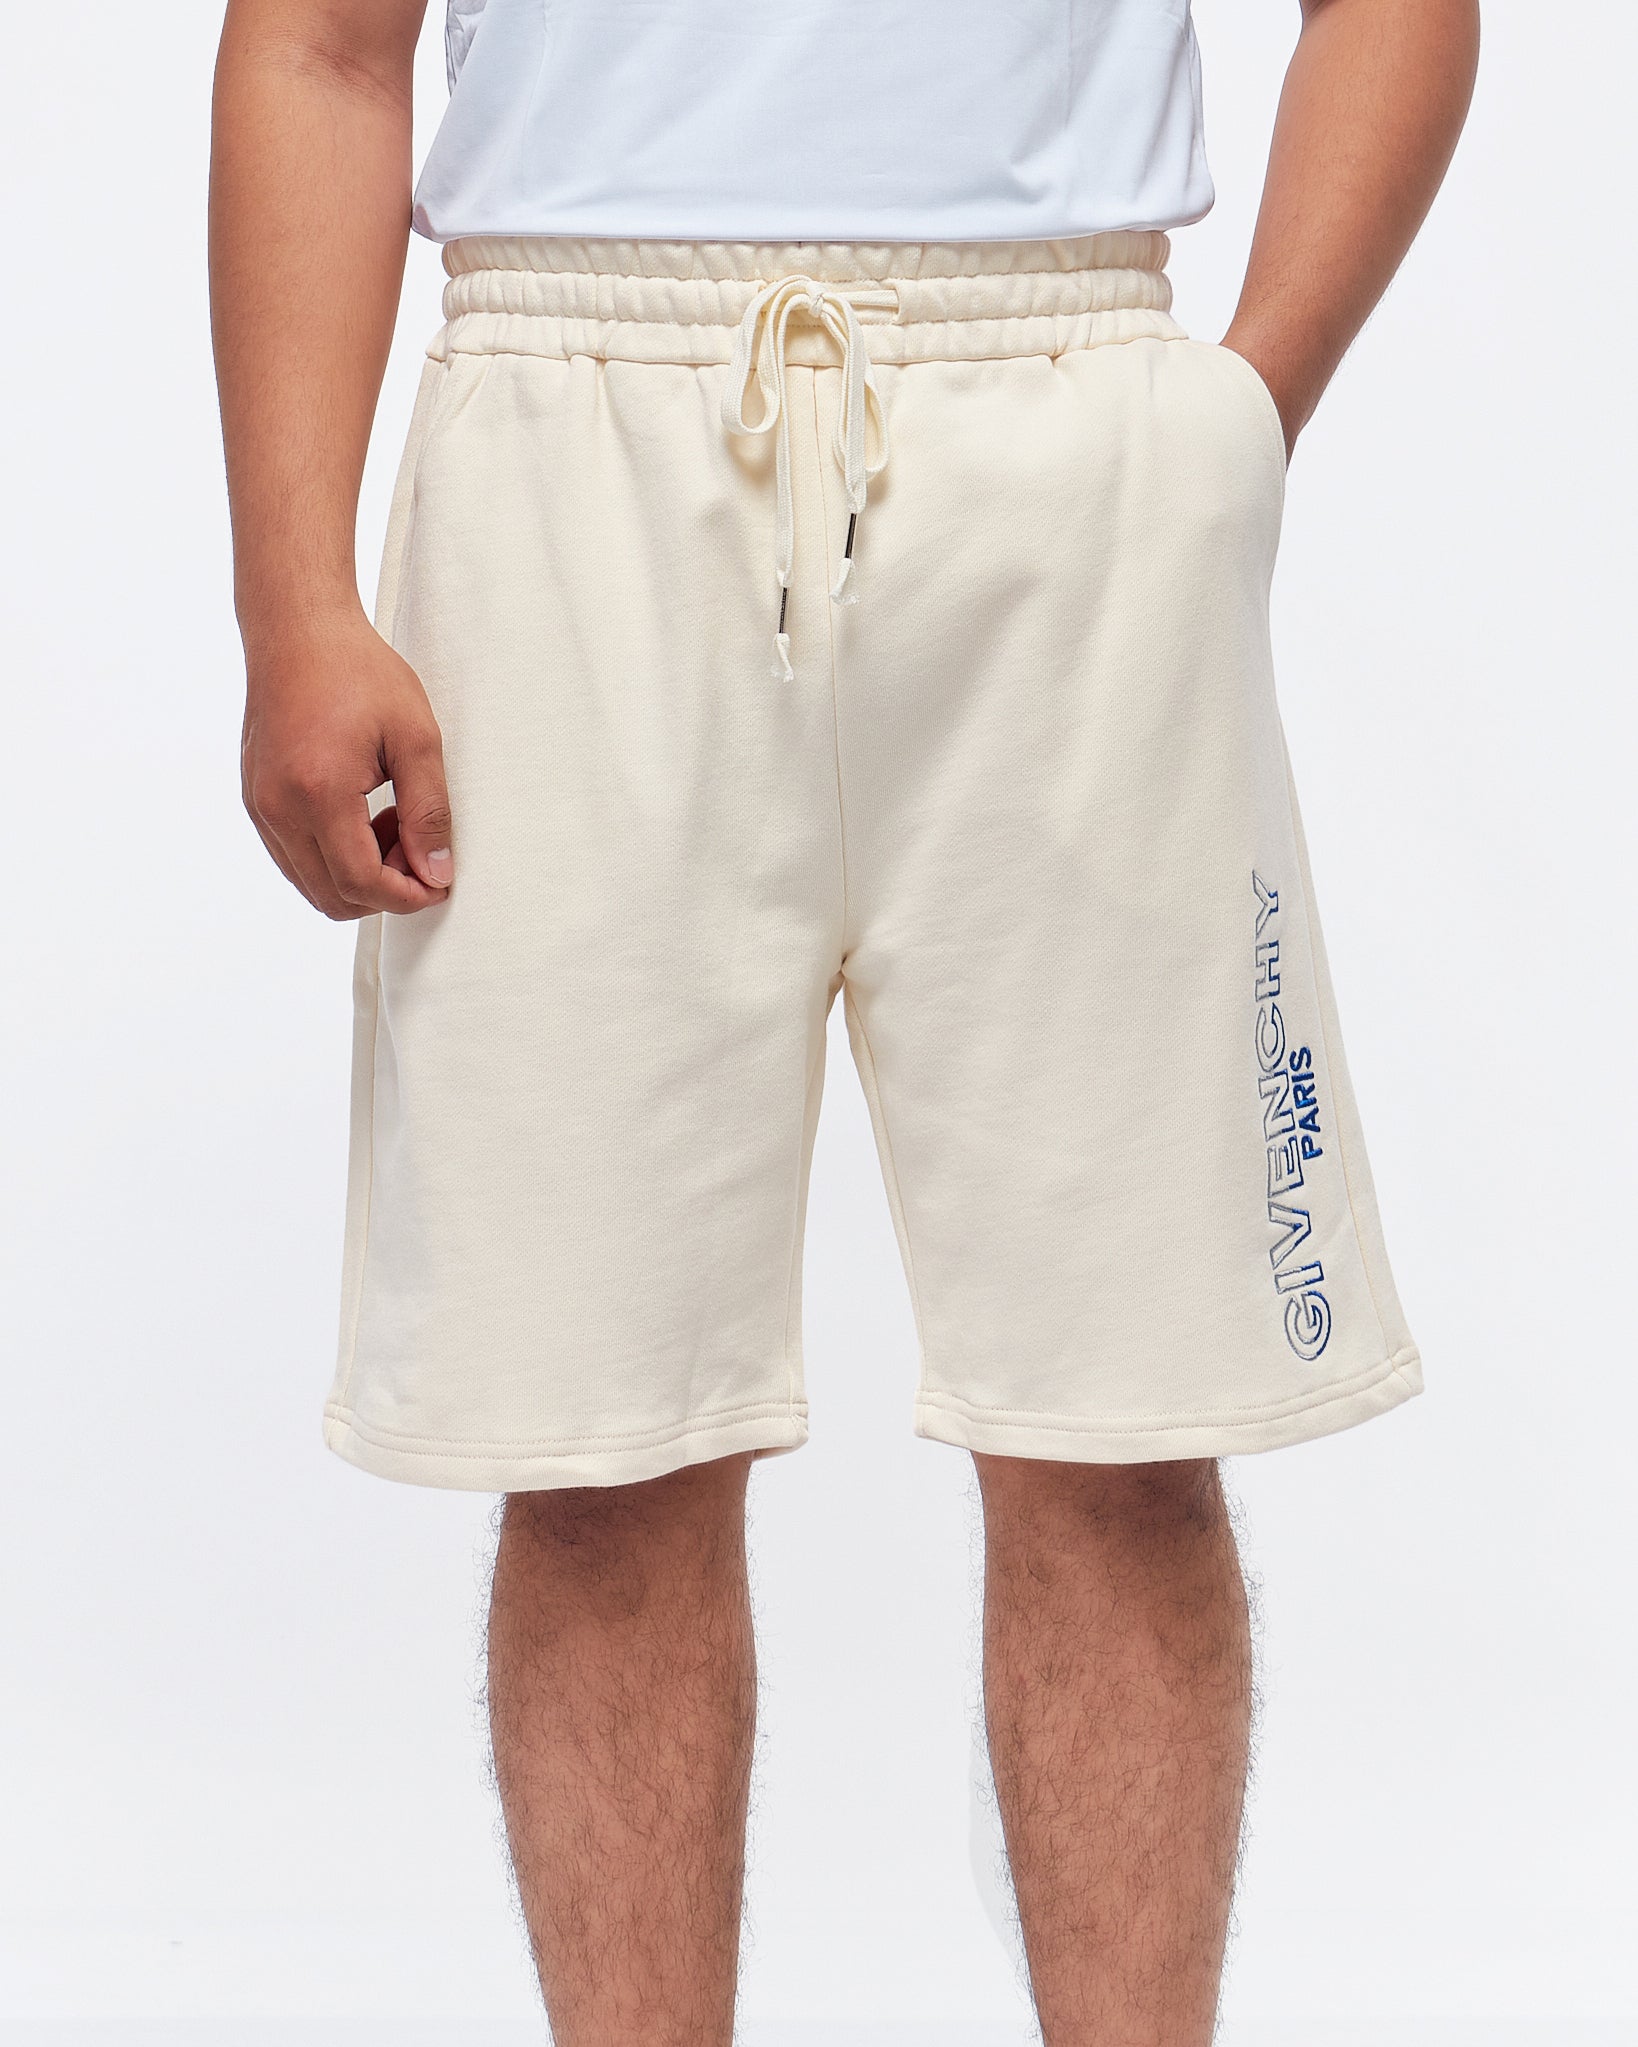 MOI OUTFIT-Givenchy Logo Embroidered Men Shorts 21.90